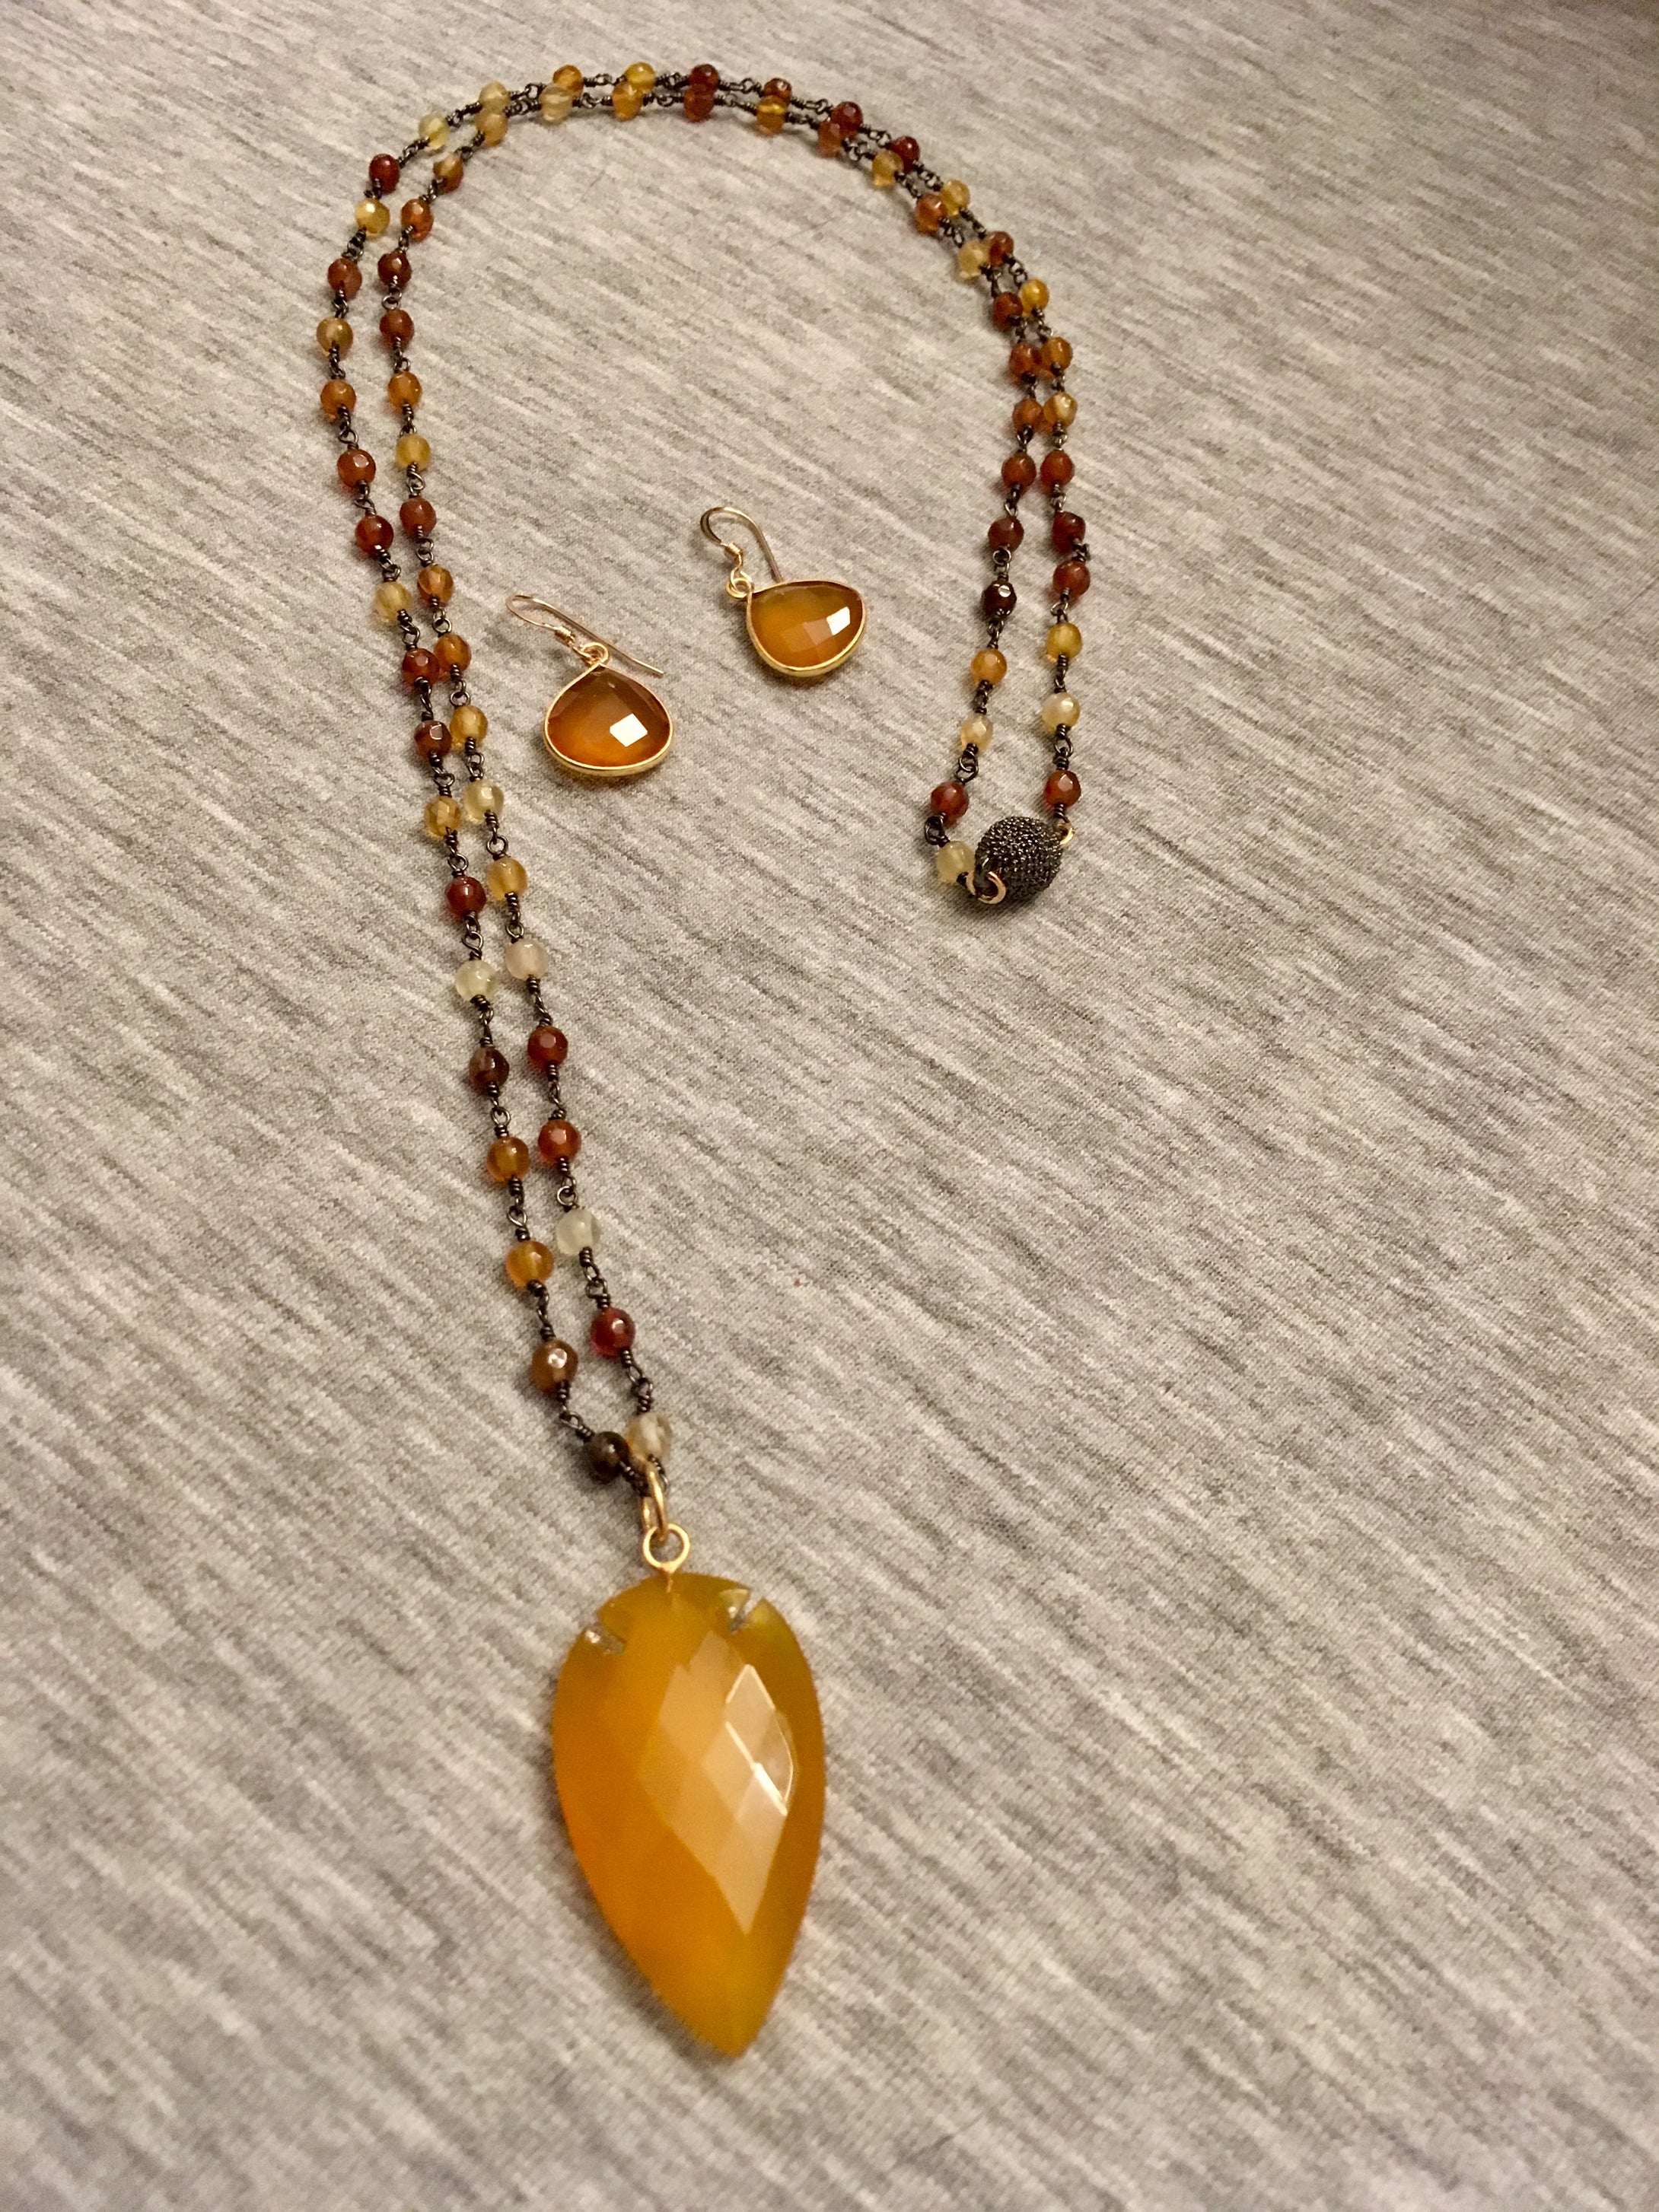 Butterscotch Pendant on Multi-Agate and Plated Gun-Metal Chain.  29